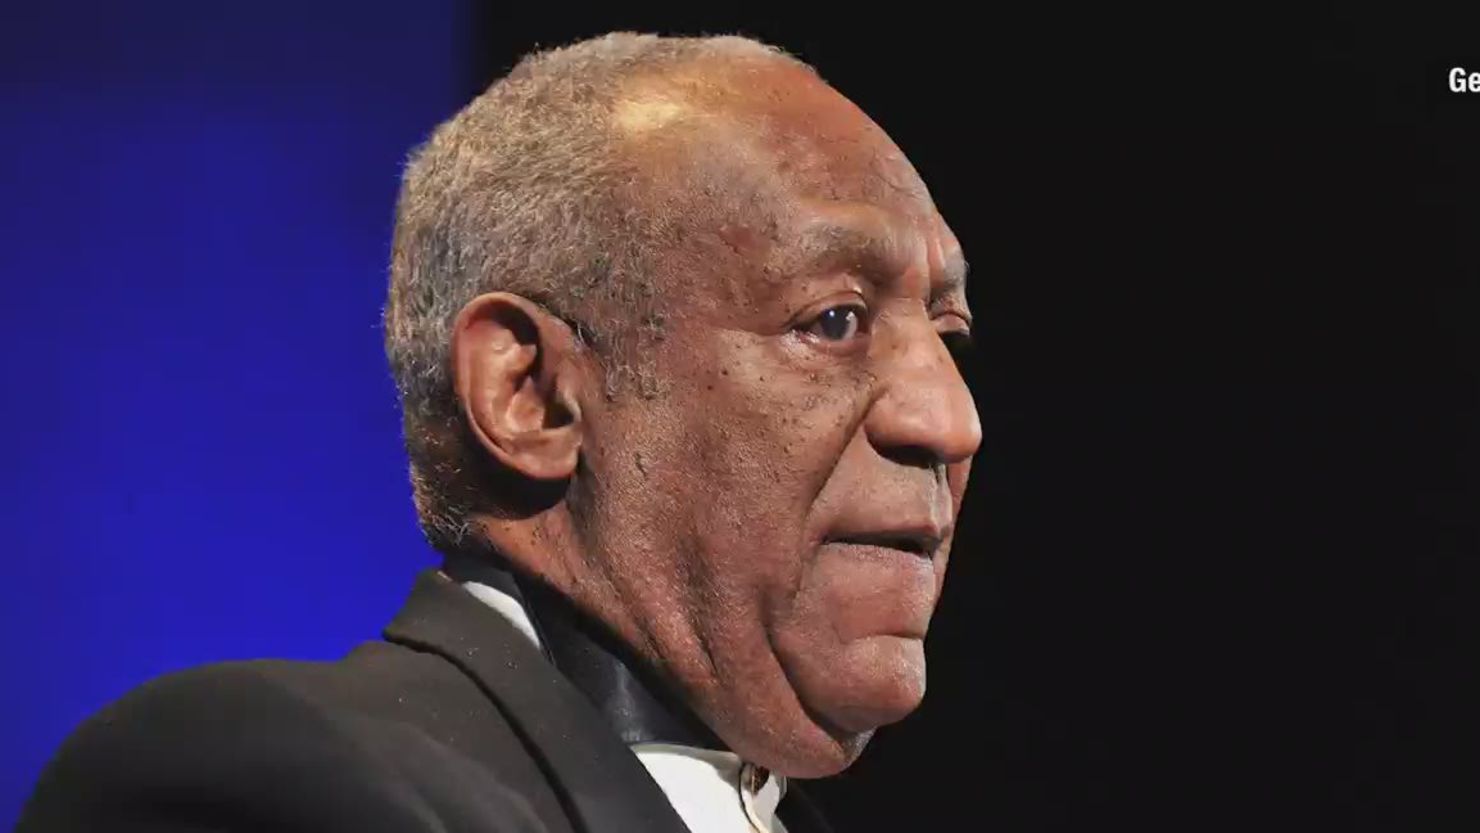 Court documents say Bill Cosby admitted to getting drugs to give to women he wanted to have sex with.